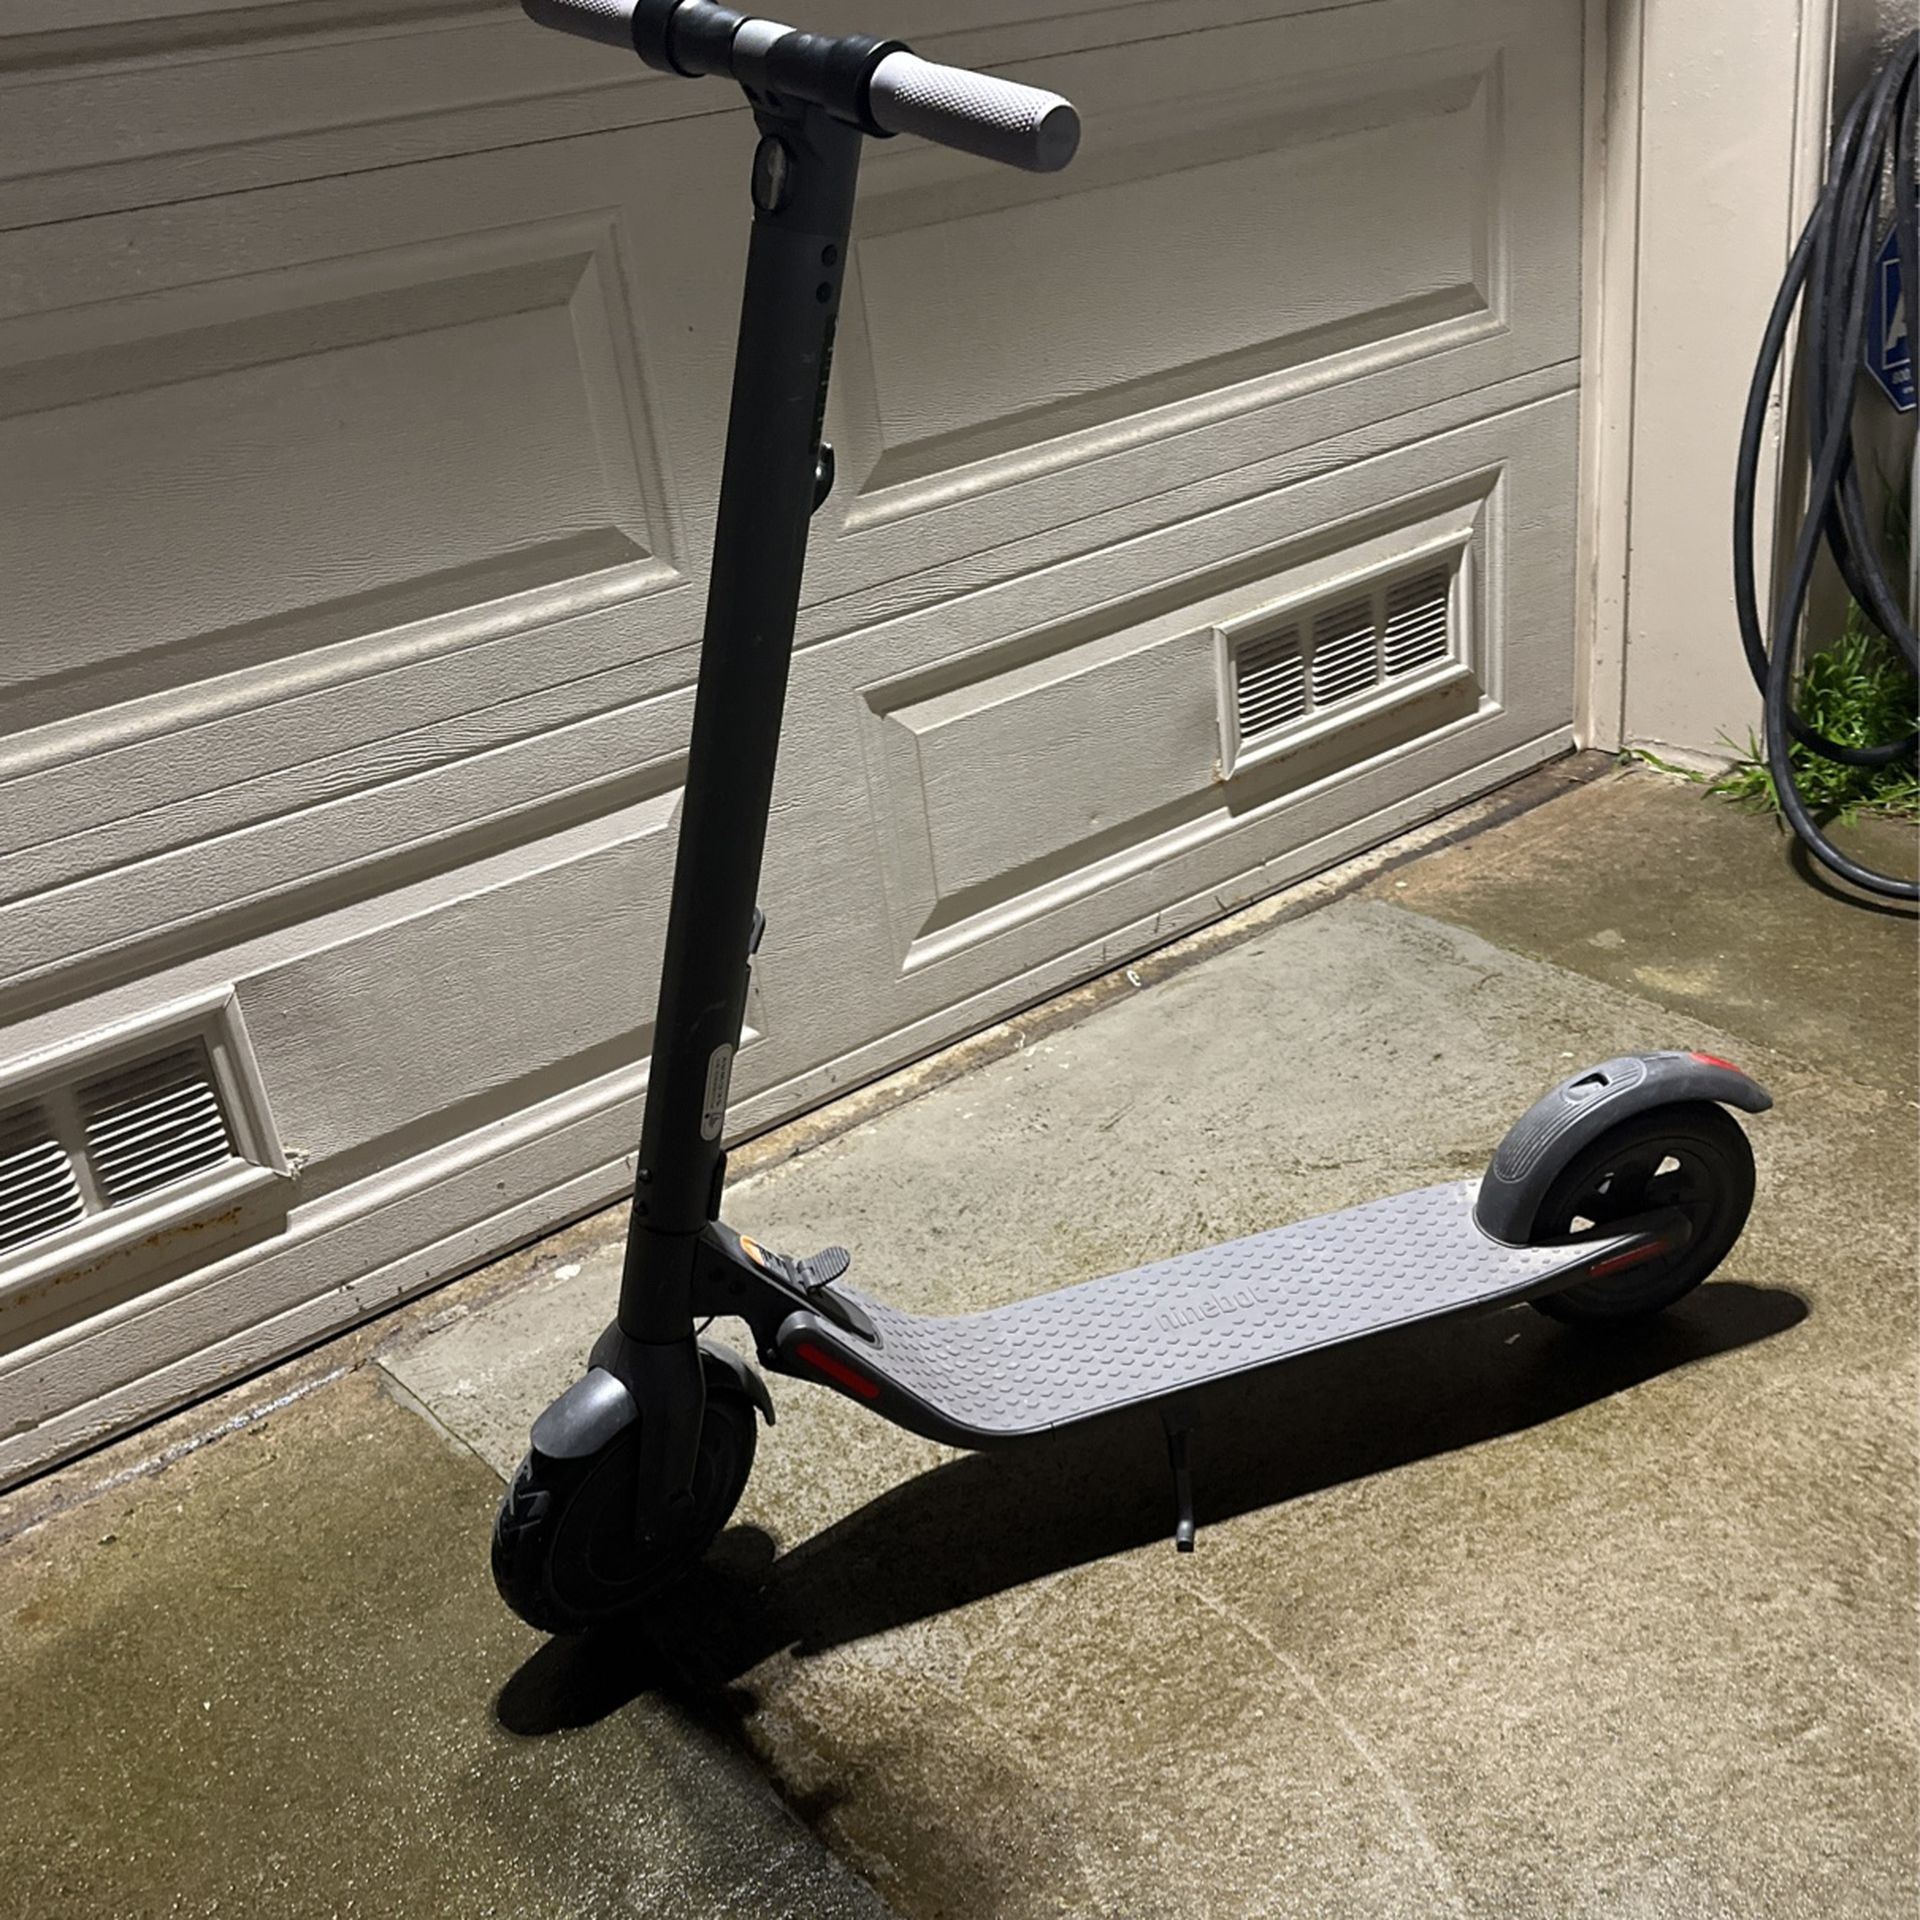 Segway E22 Scooter (Great Scooter)